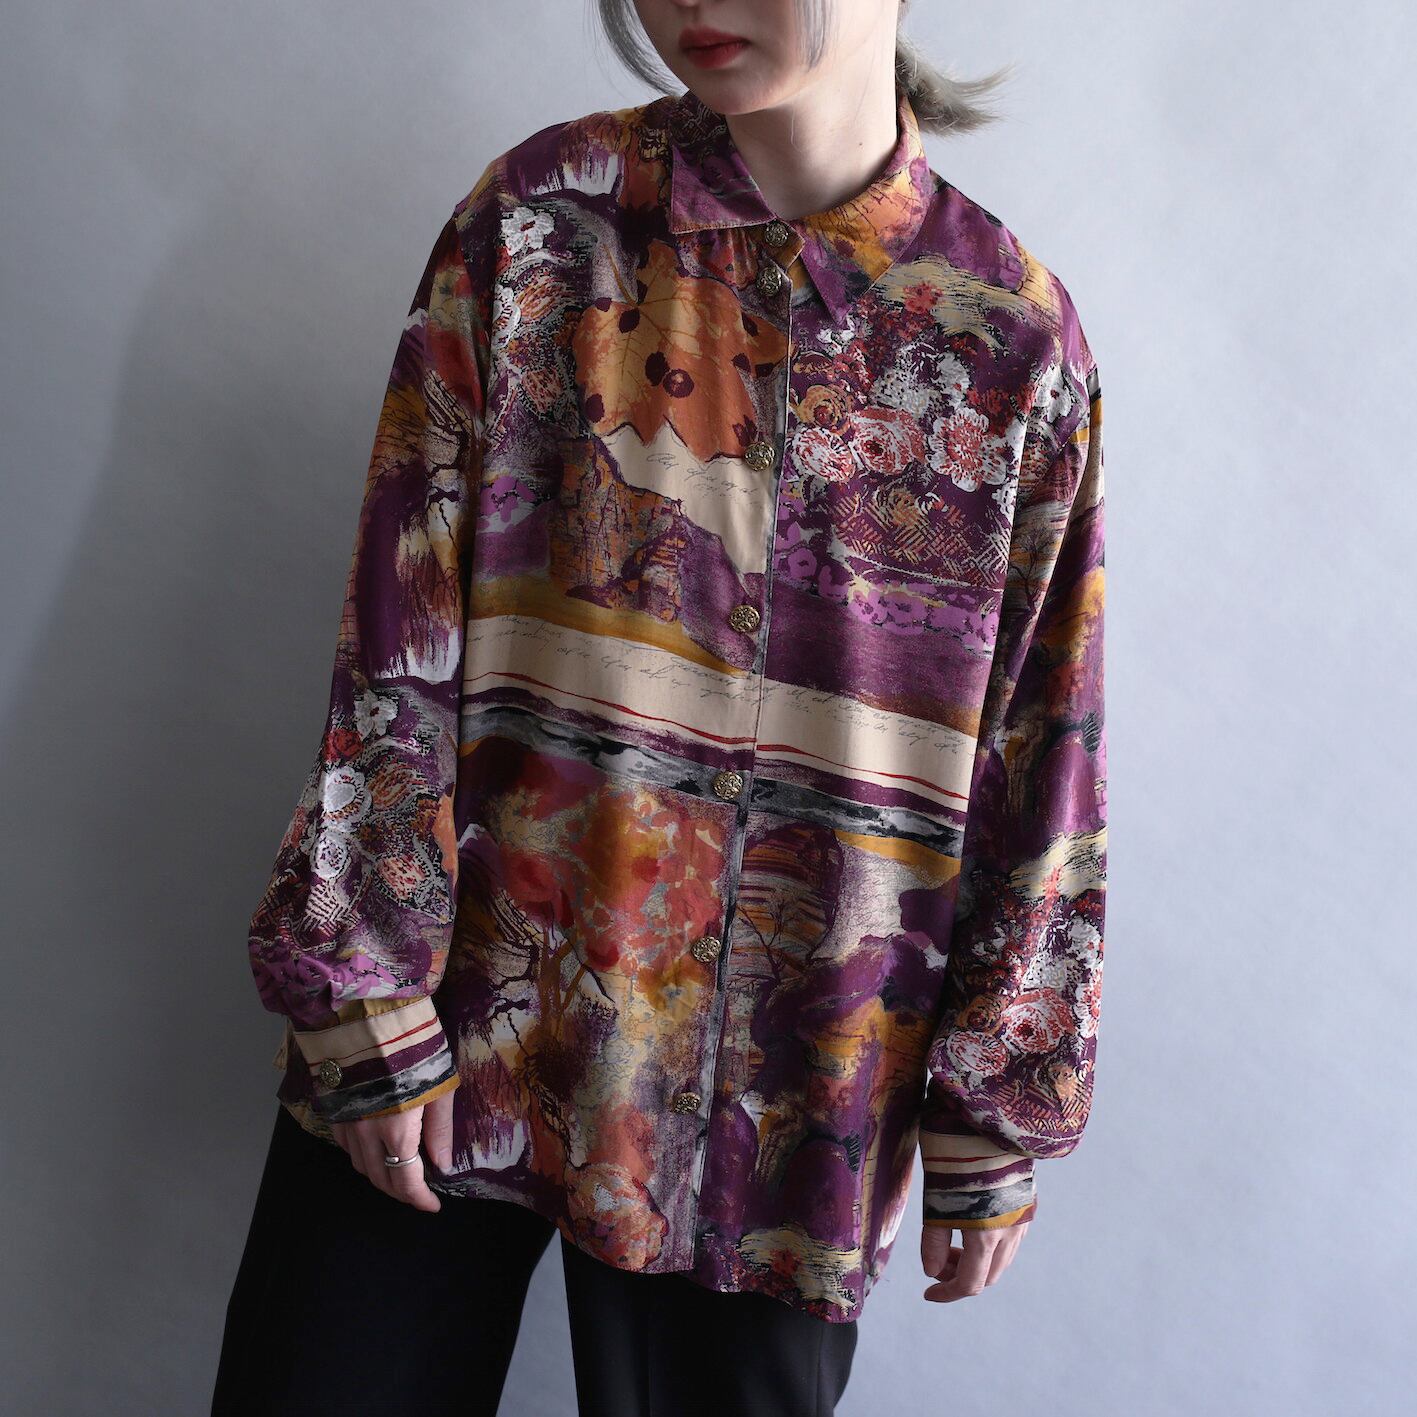 art graphic nice color pattern shirt